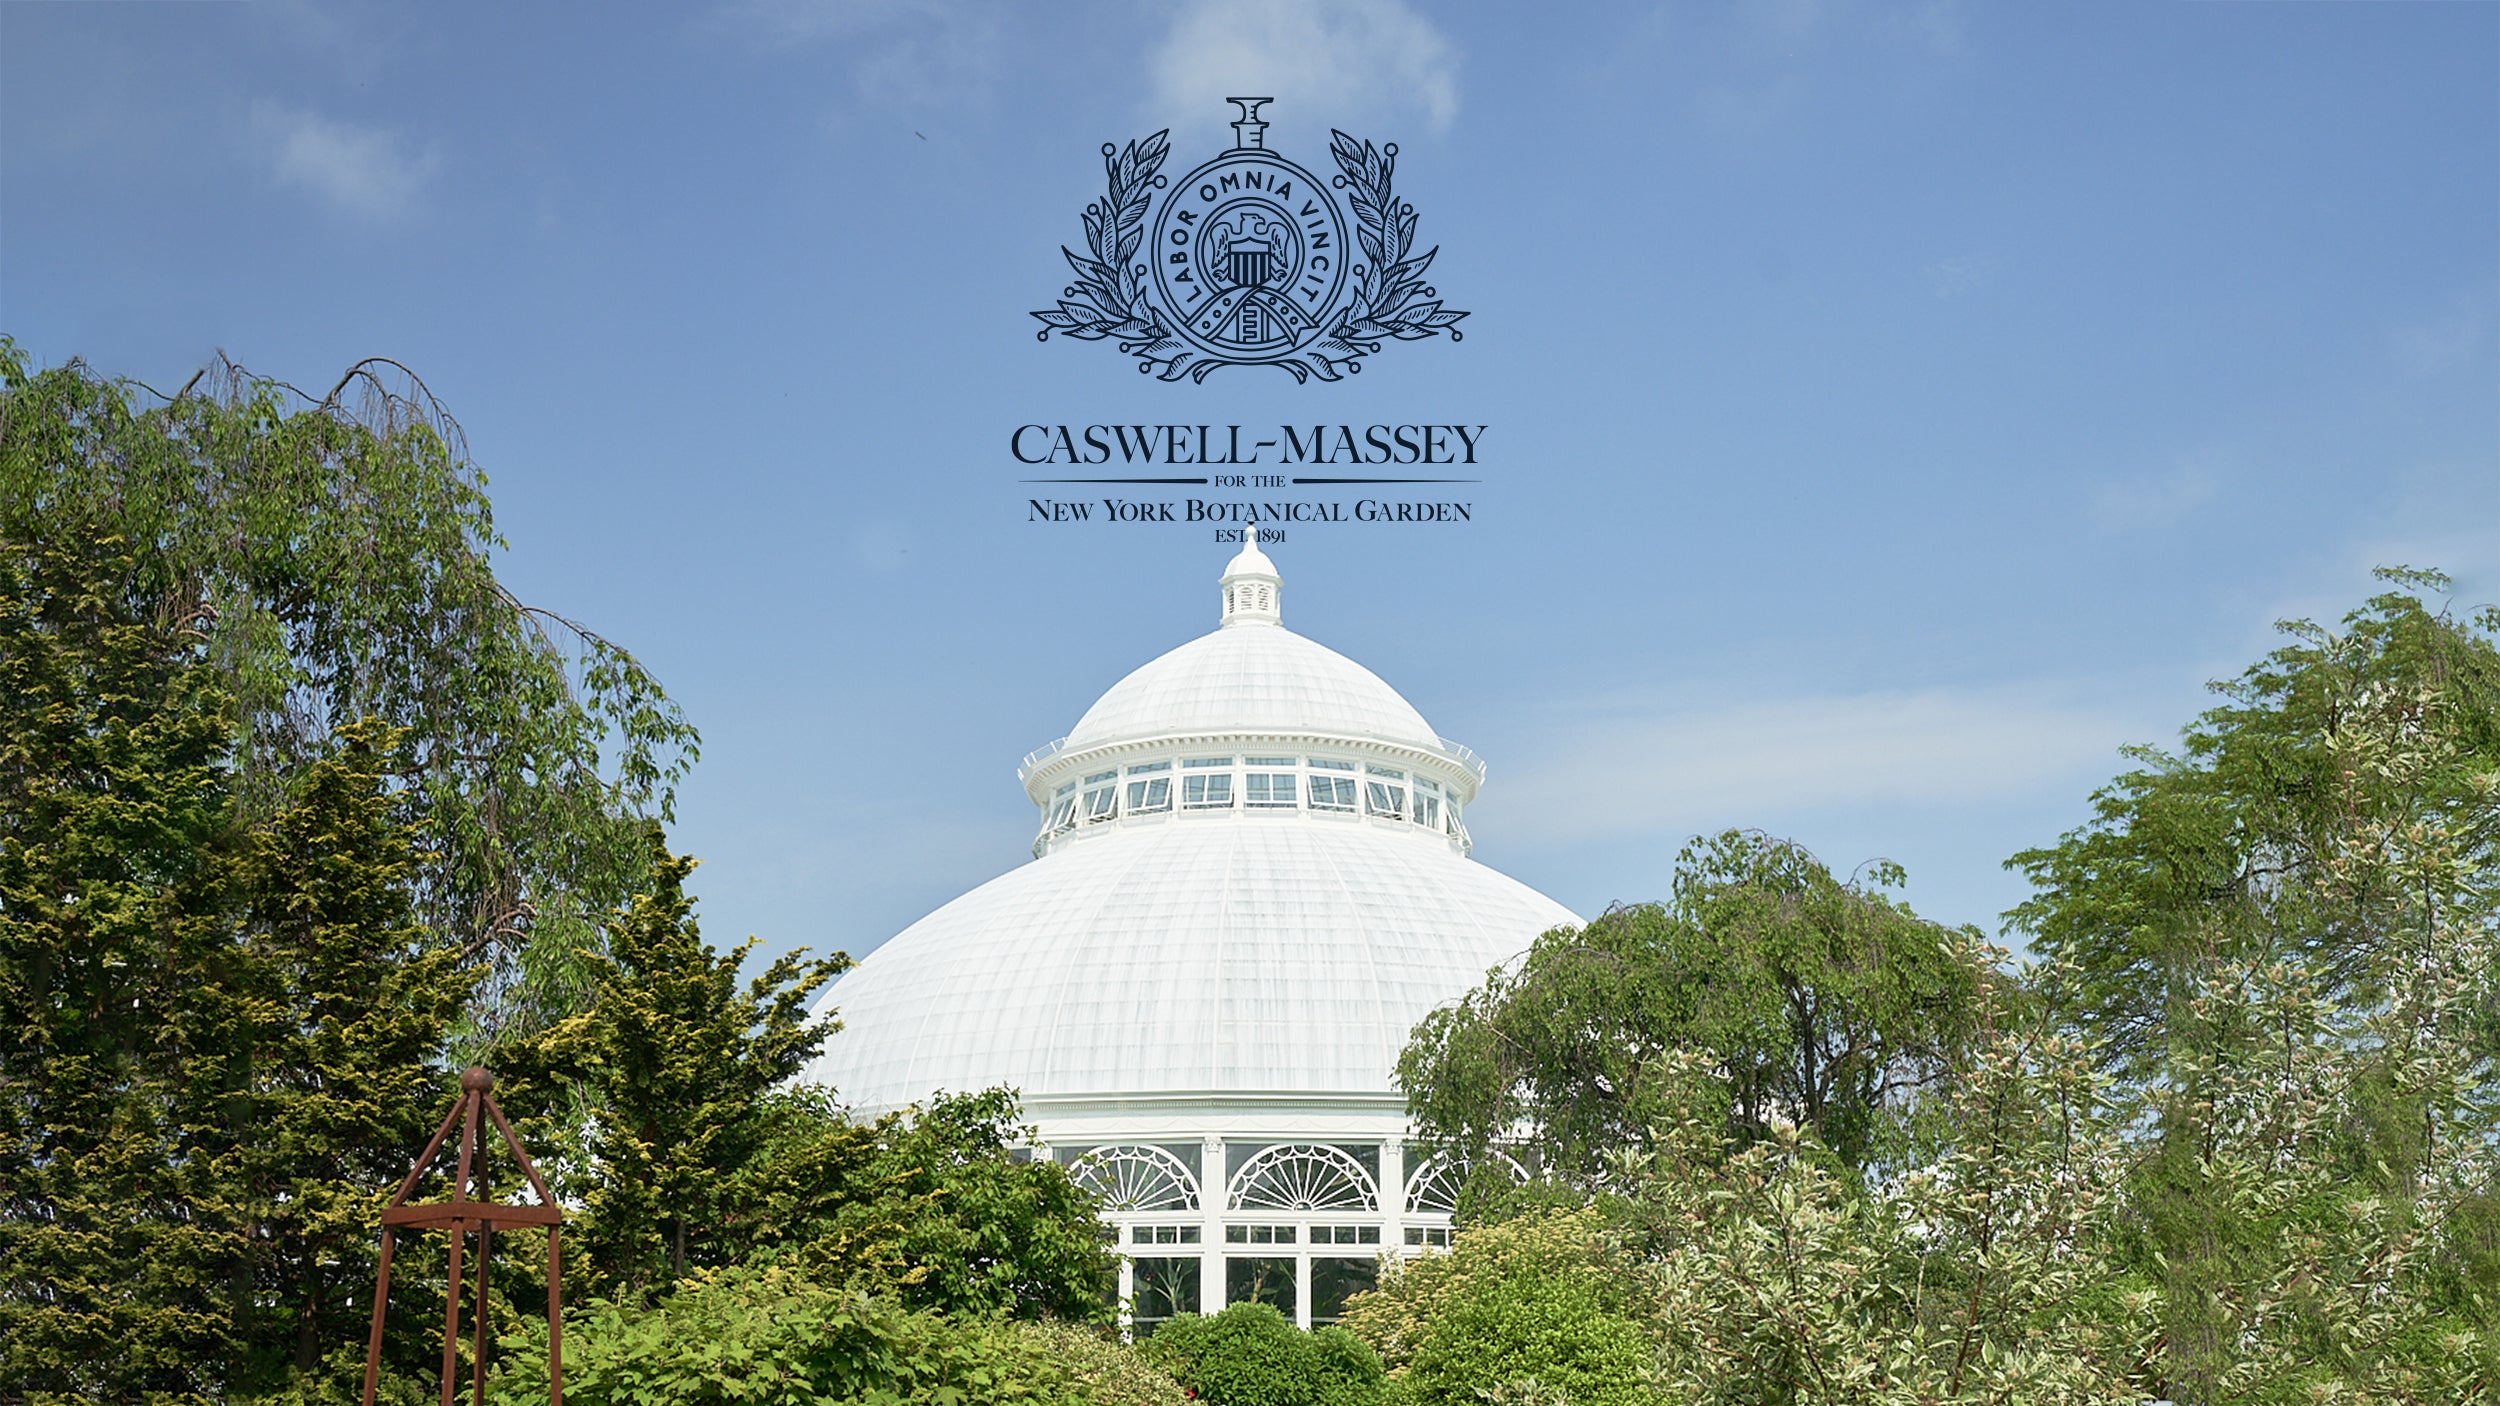 Caswell-Massey and New York Botanical Garden partnership landing page image of greenhouse at the NYBG